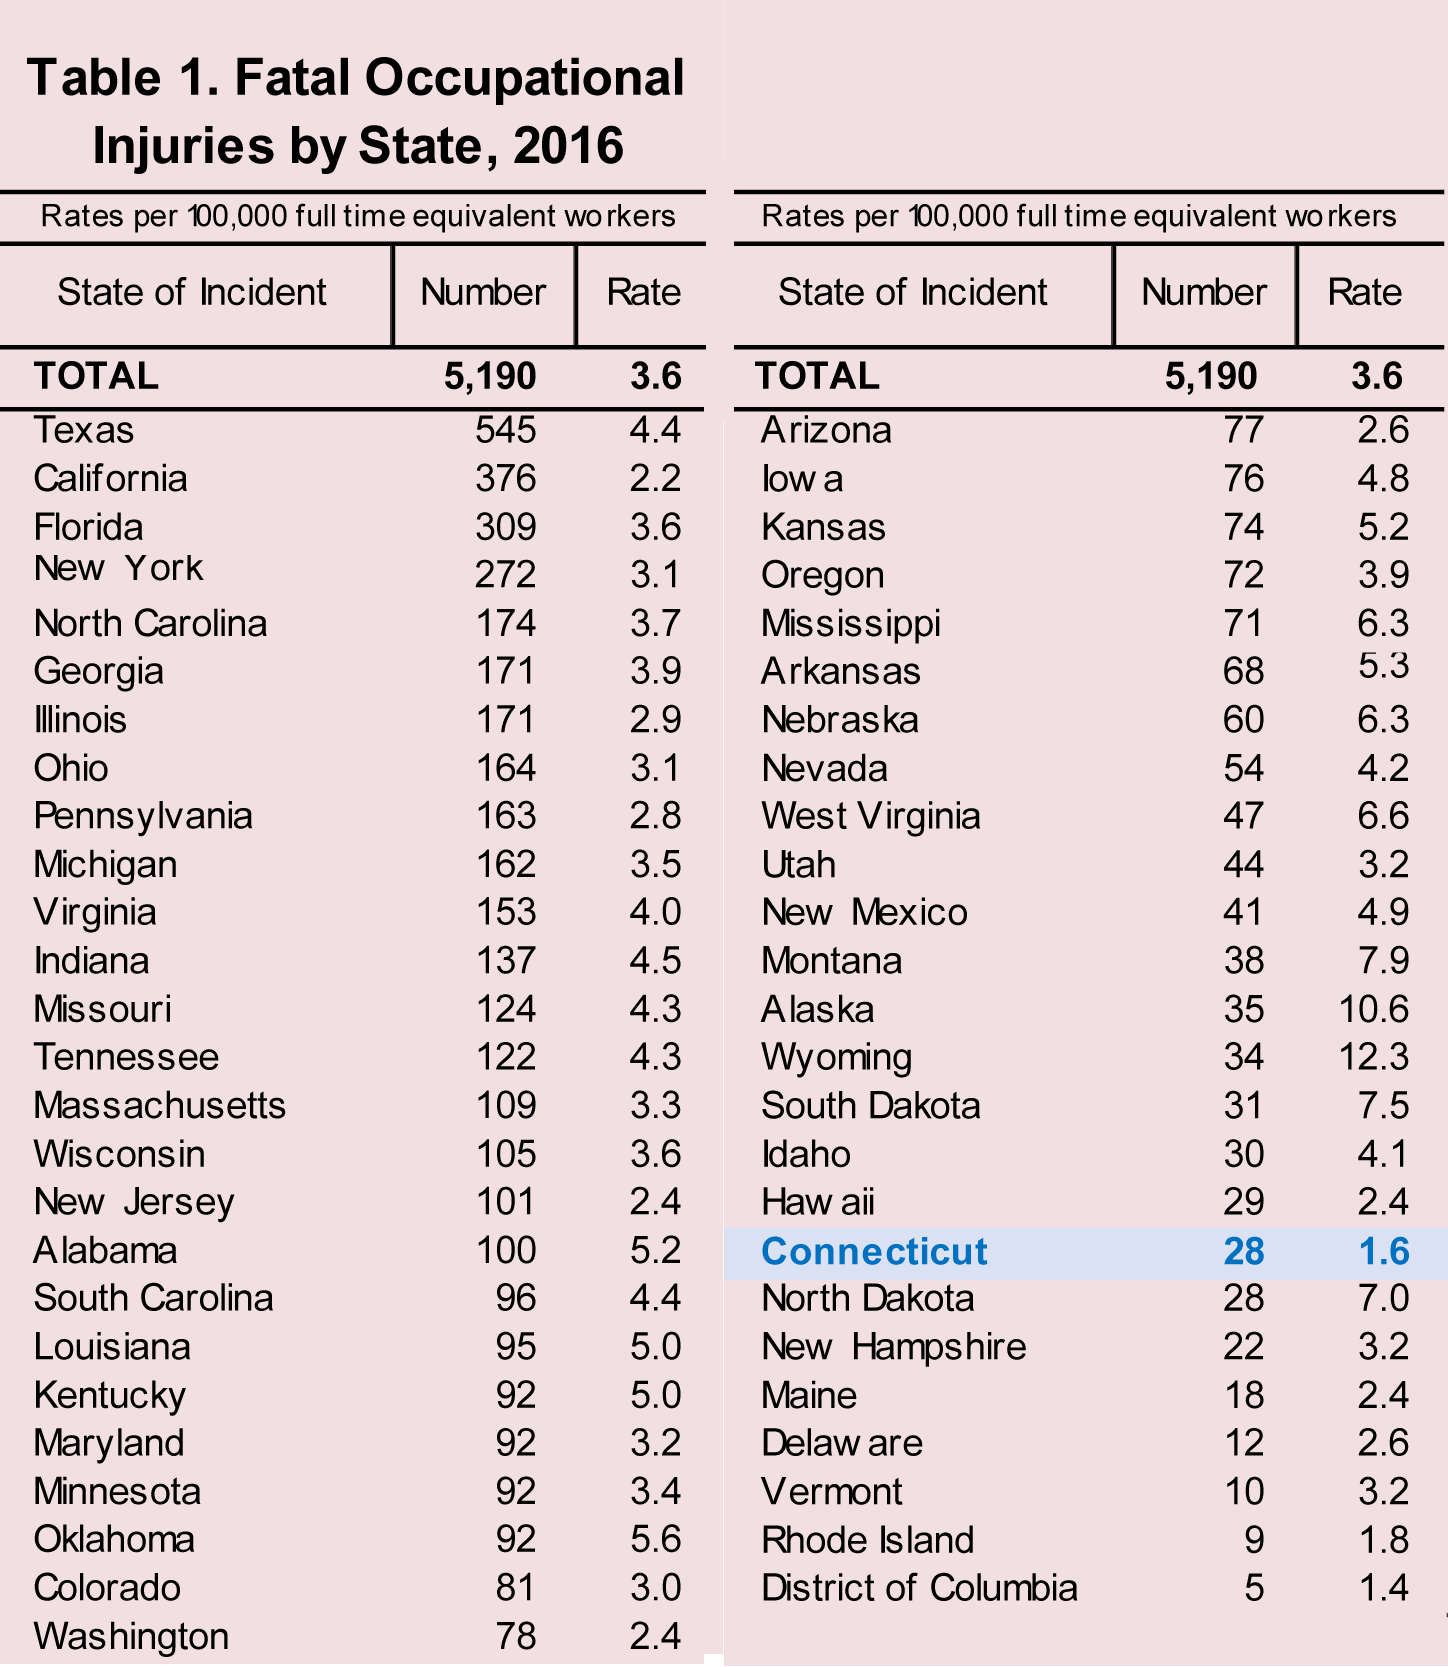 Table 1. Fatal Occupational Injuries by State, 2016